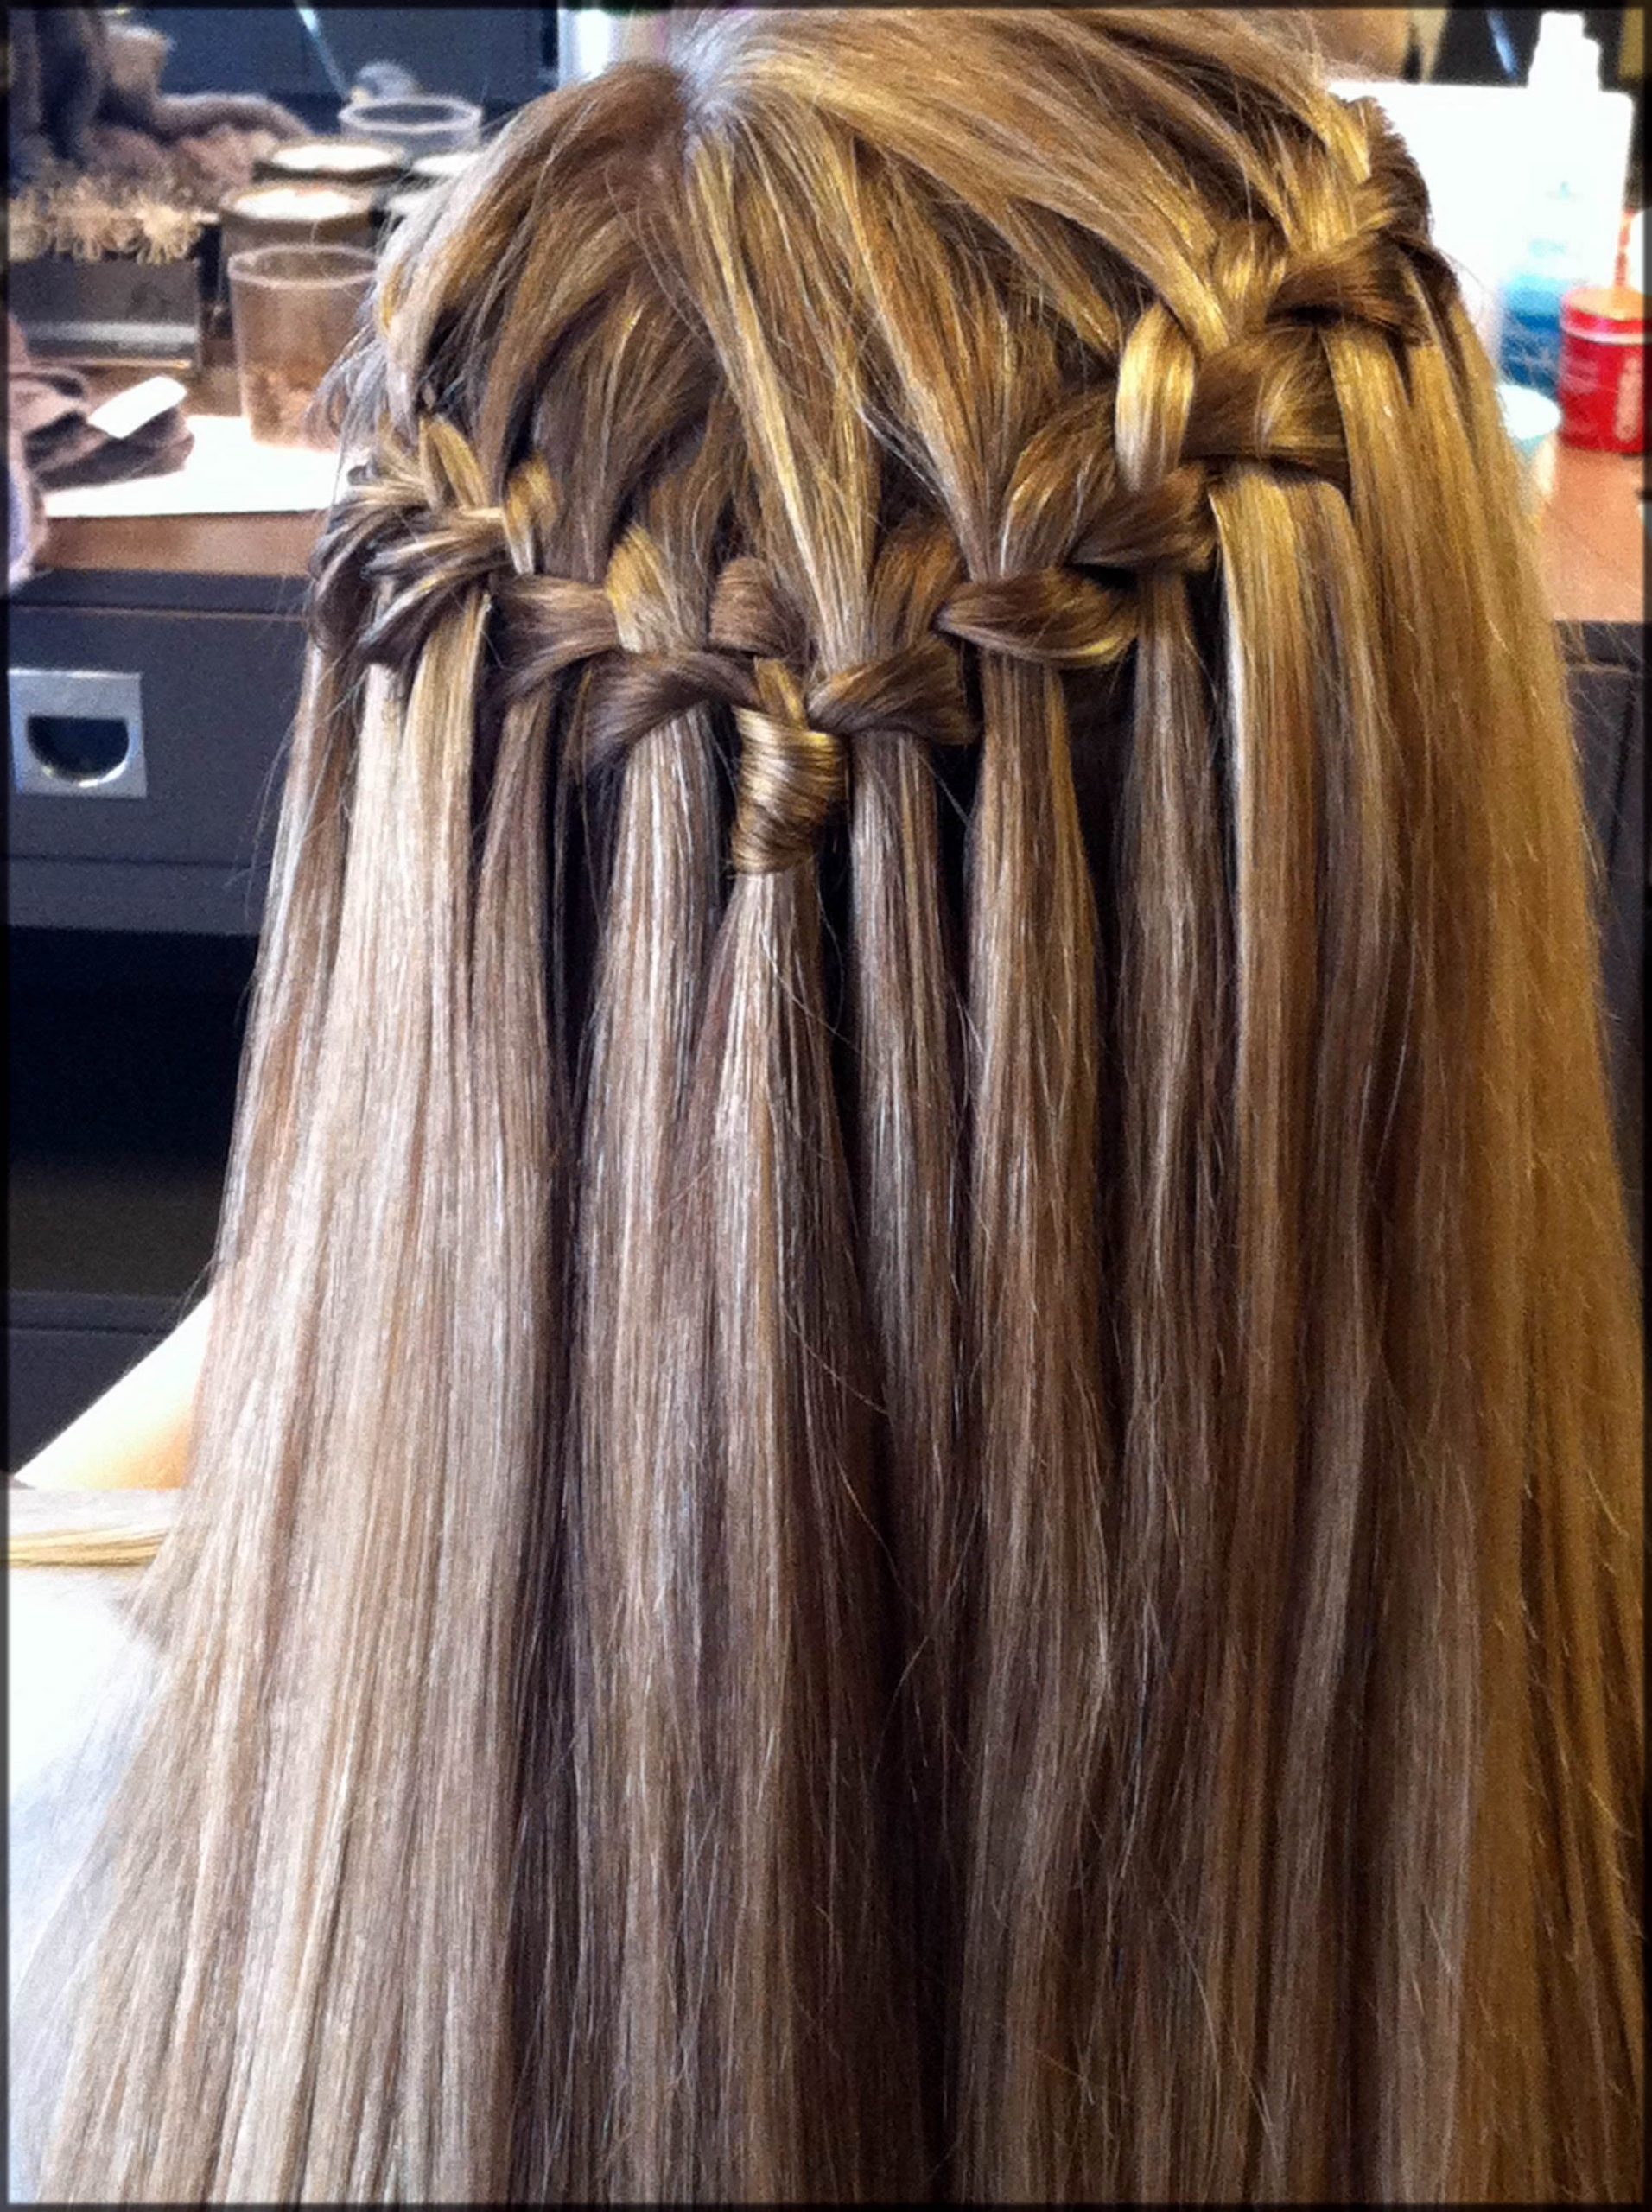 Different hairstyle for long hair girls - Simple Craft Idea